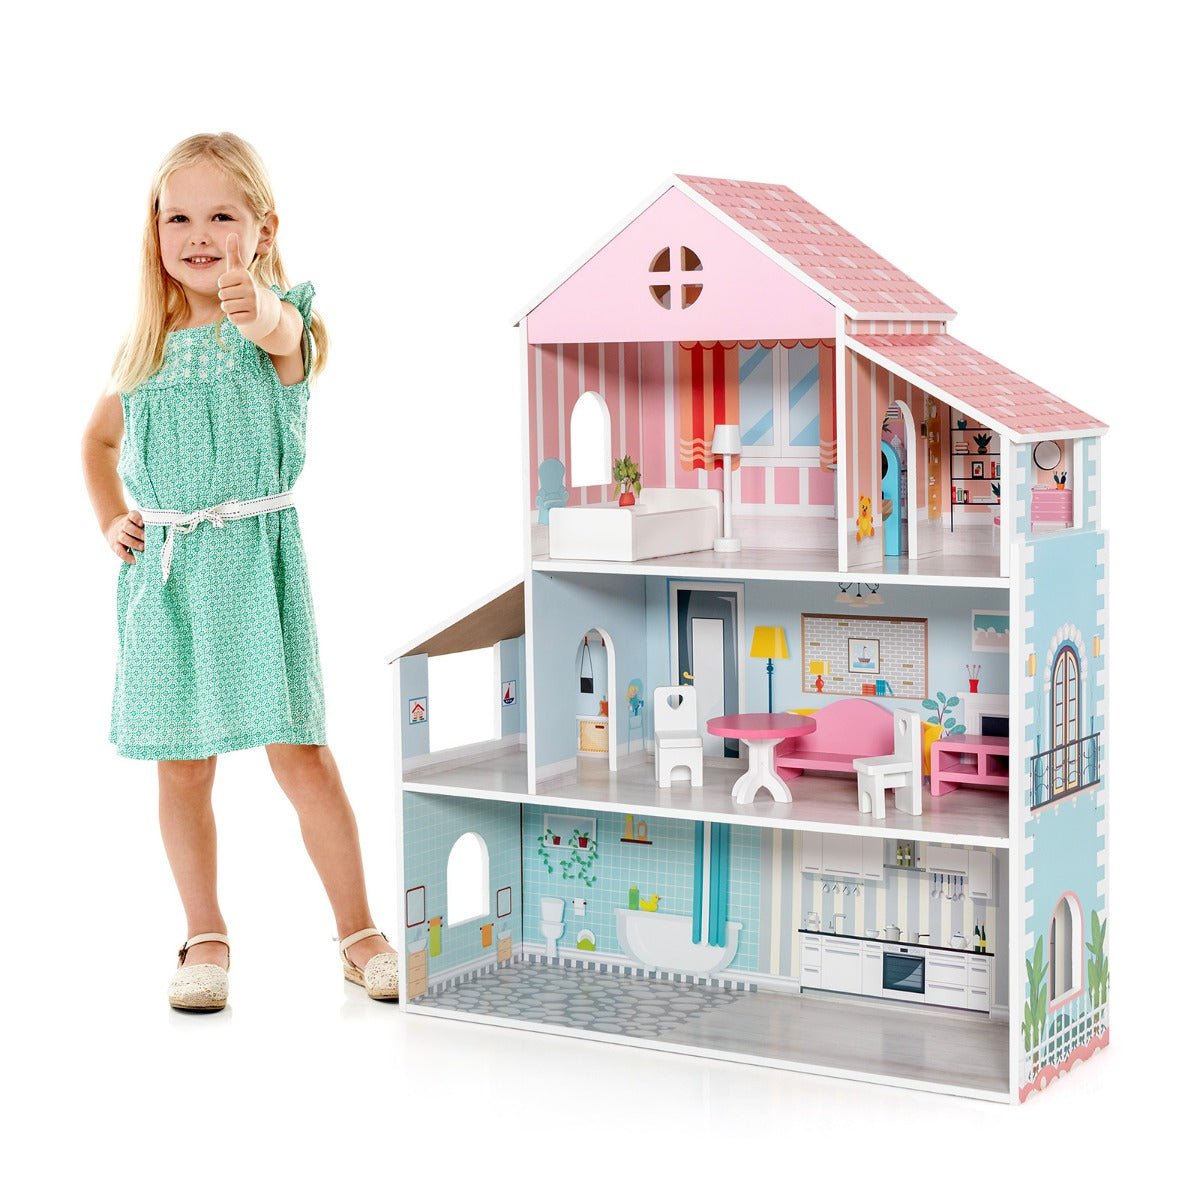 Wooden Pretend Play Doll House with Furniture: Where Stories Come Alive